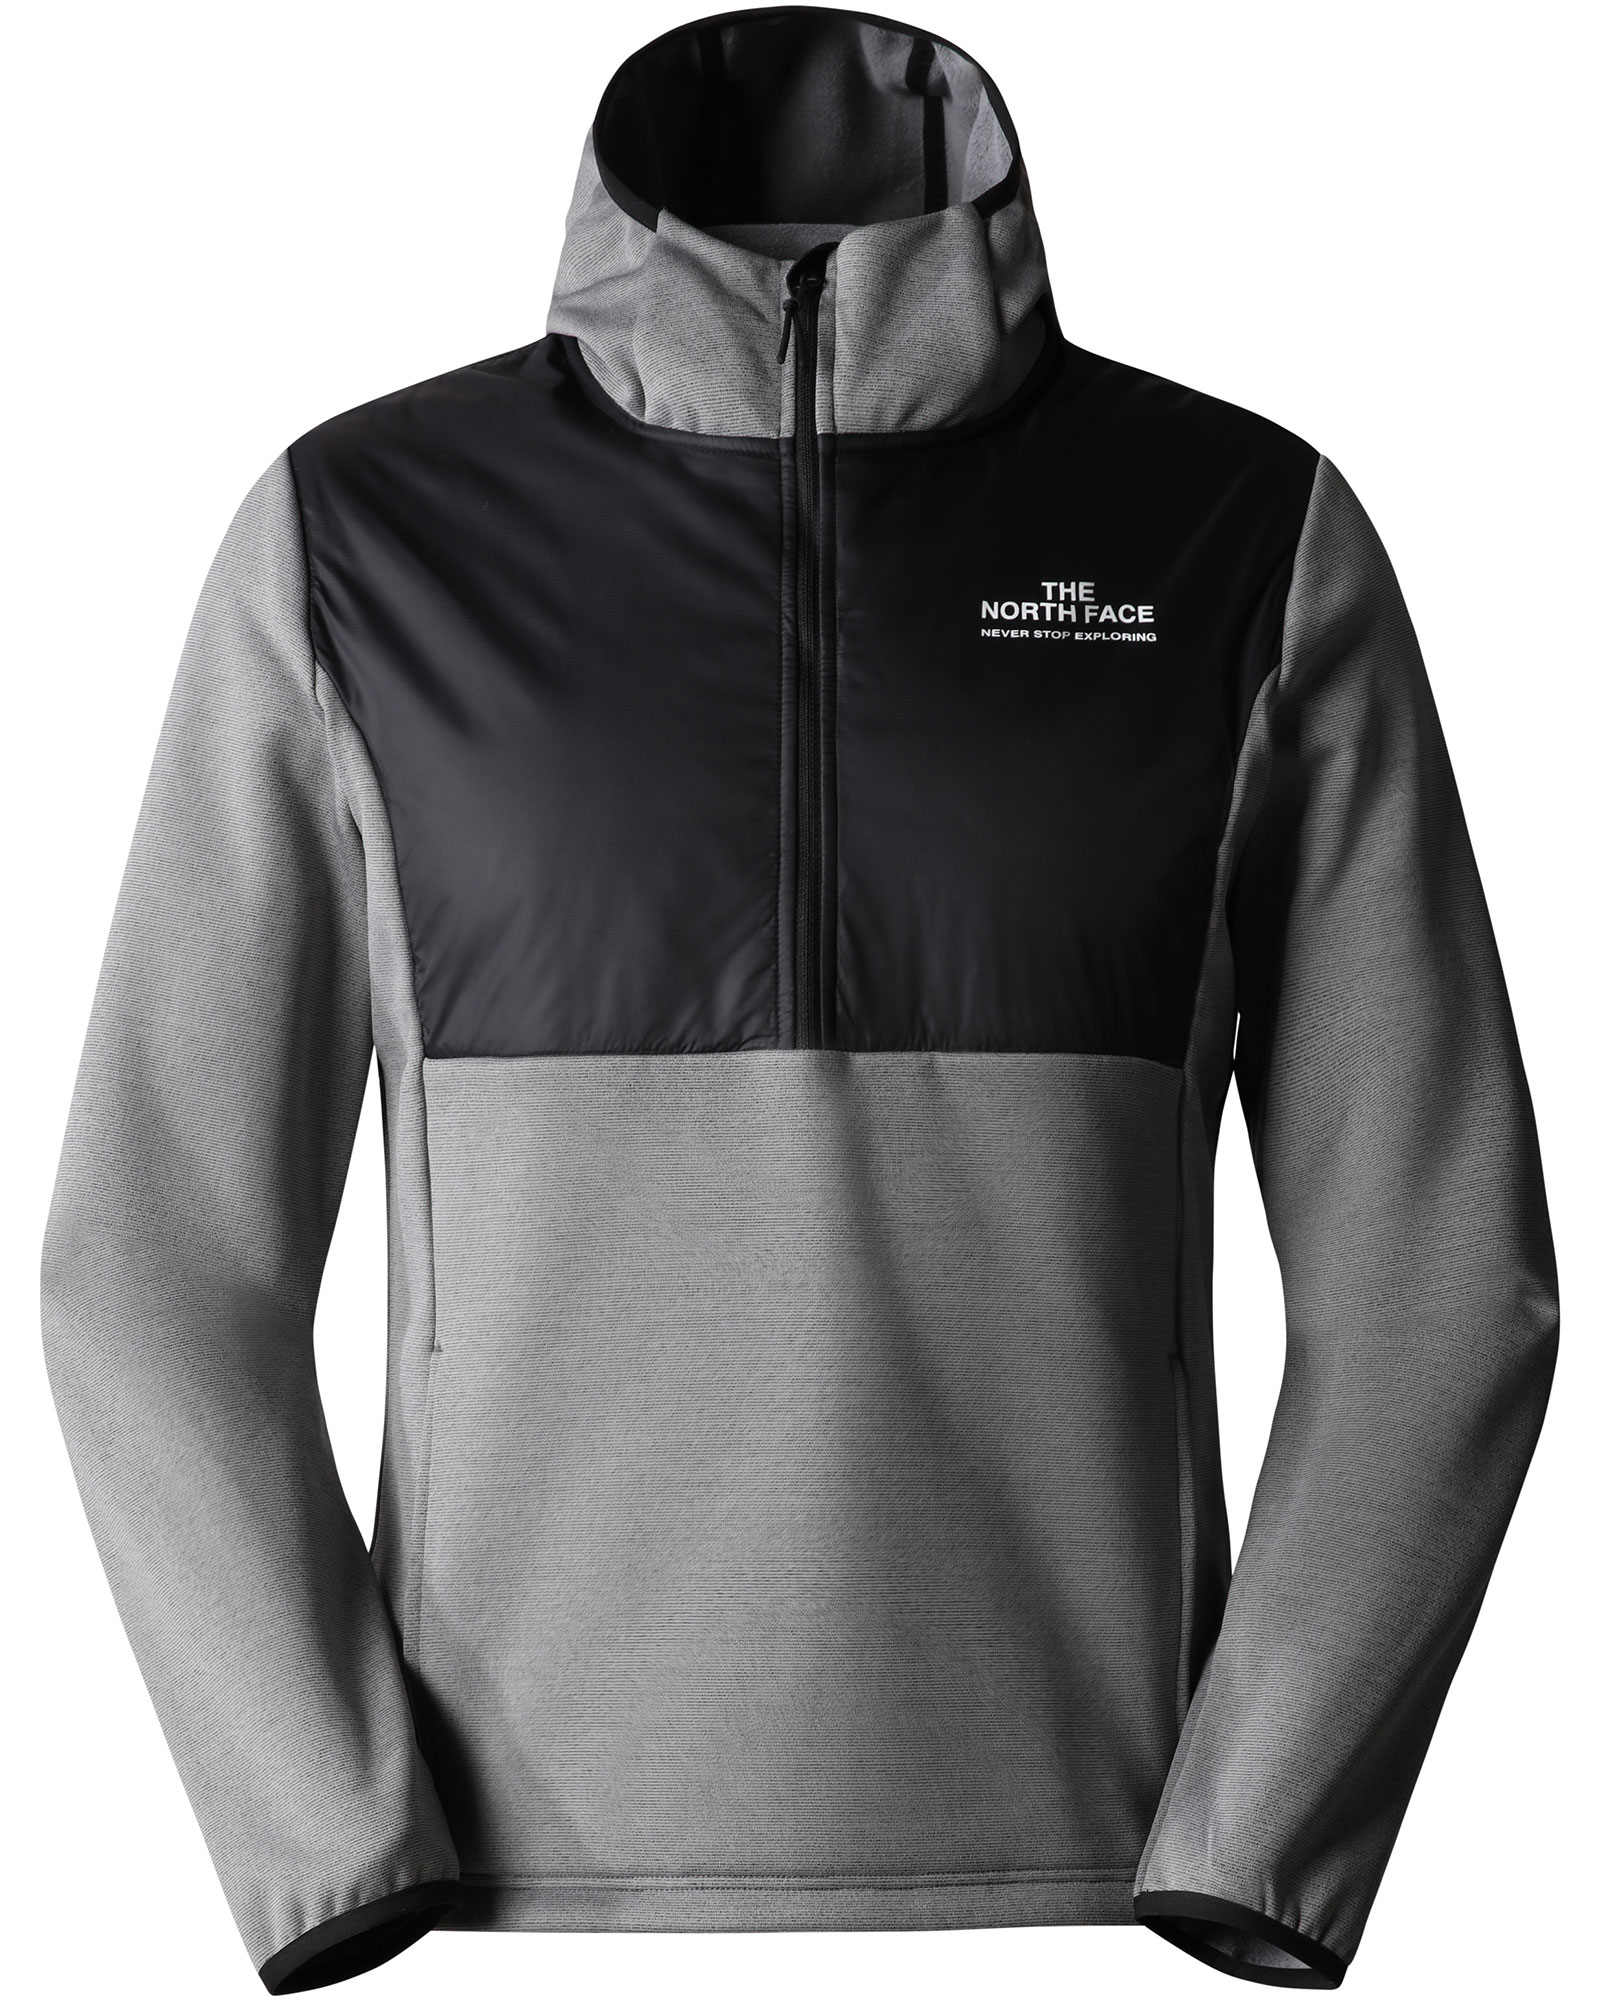 Product image of The North Face MA Insulated Men's 1/4 Zip Fleece Hoody